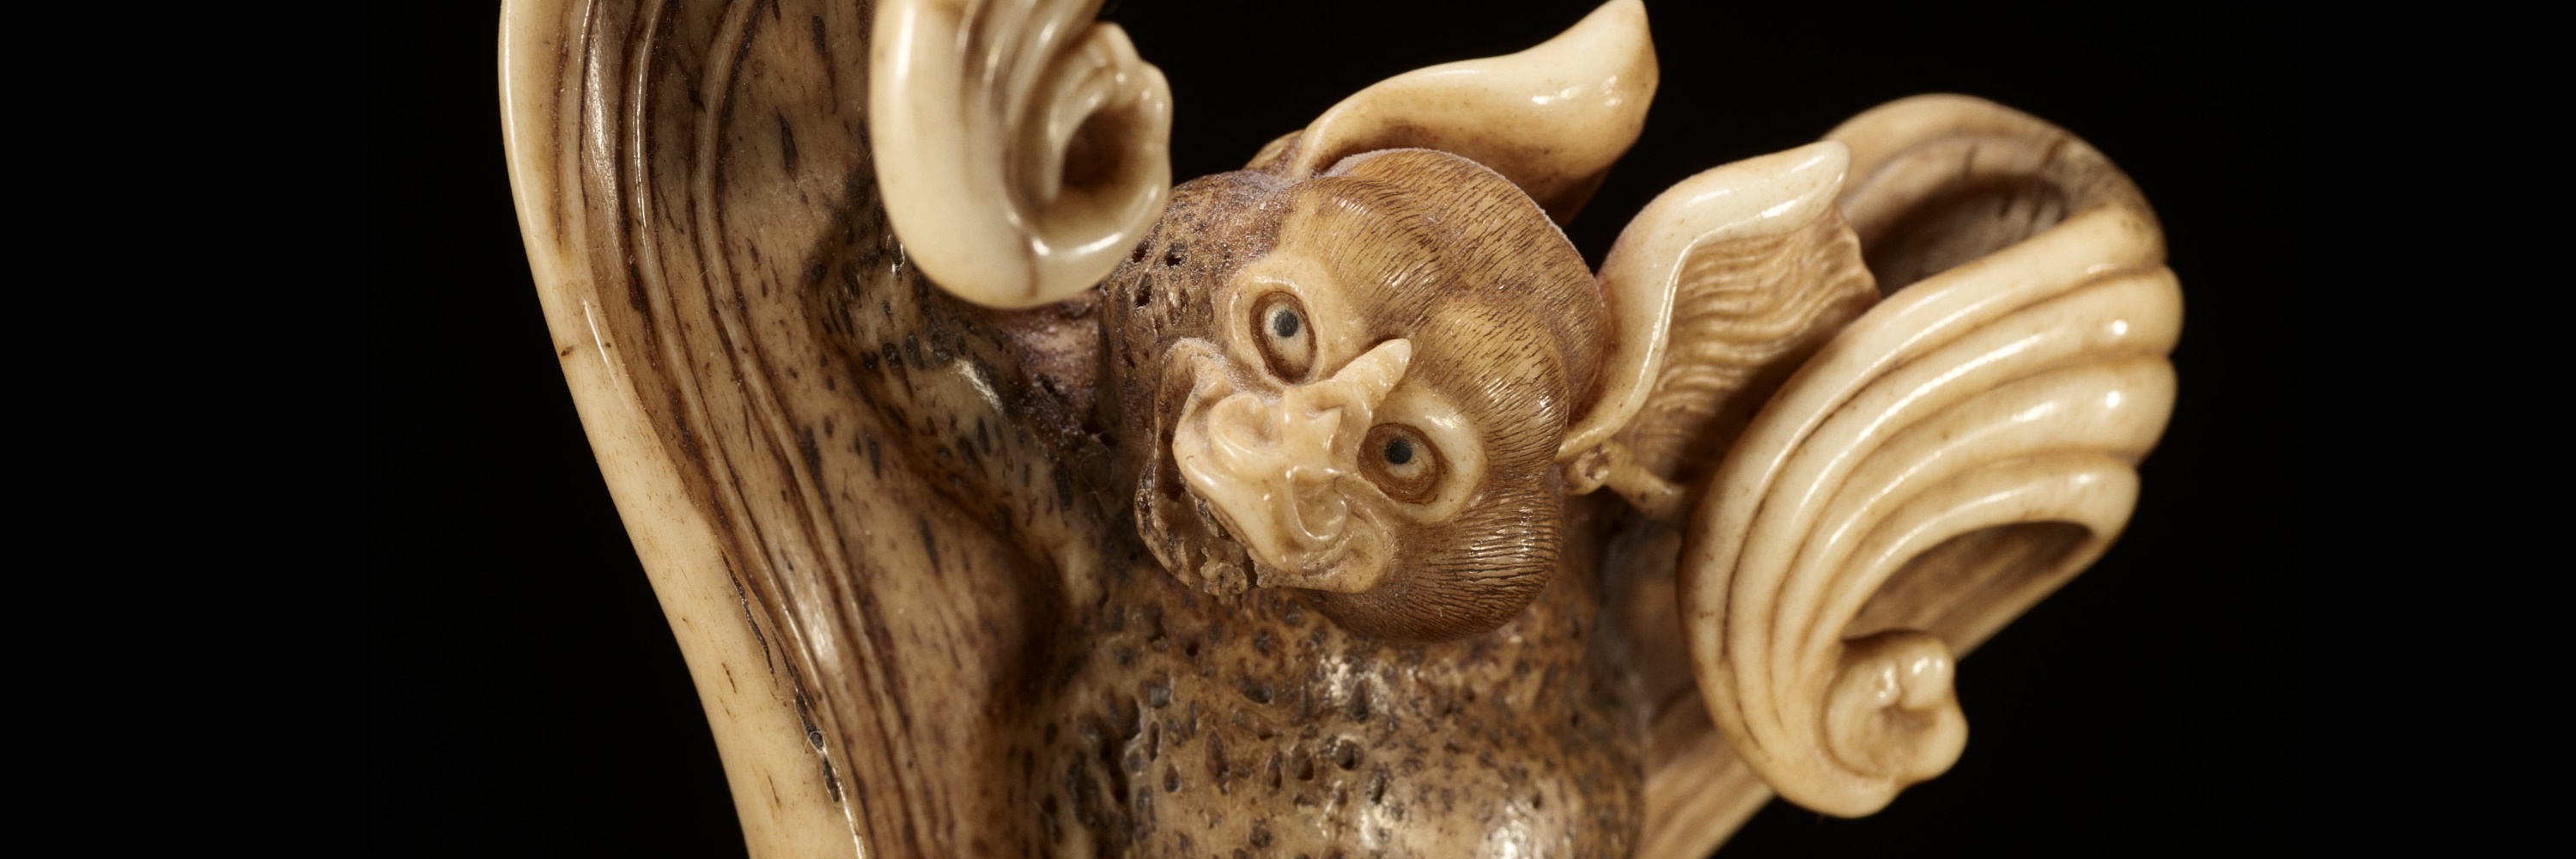 Masterful Contemporary Netsuke Up for Auction